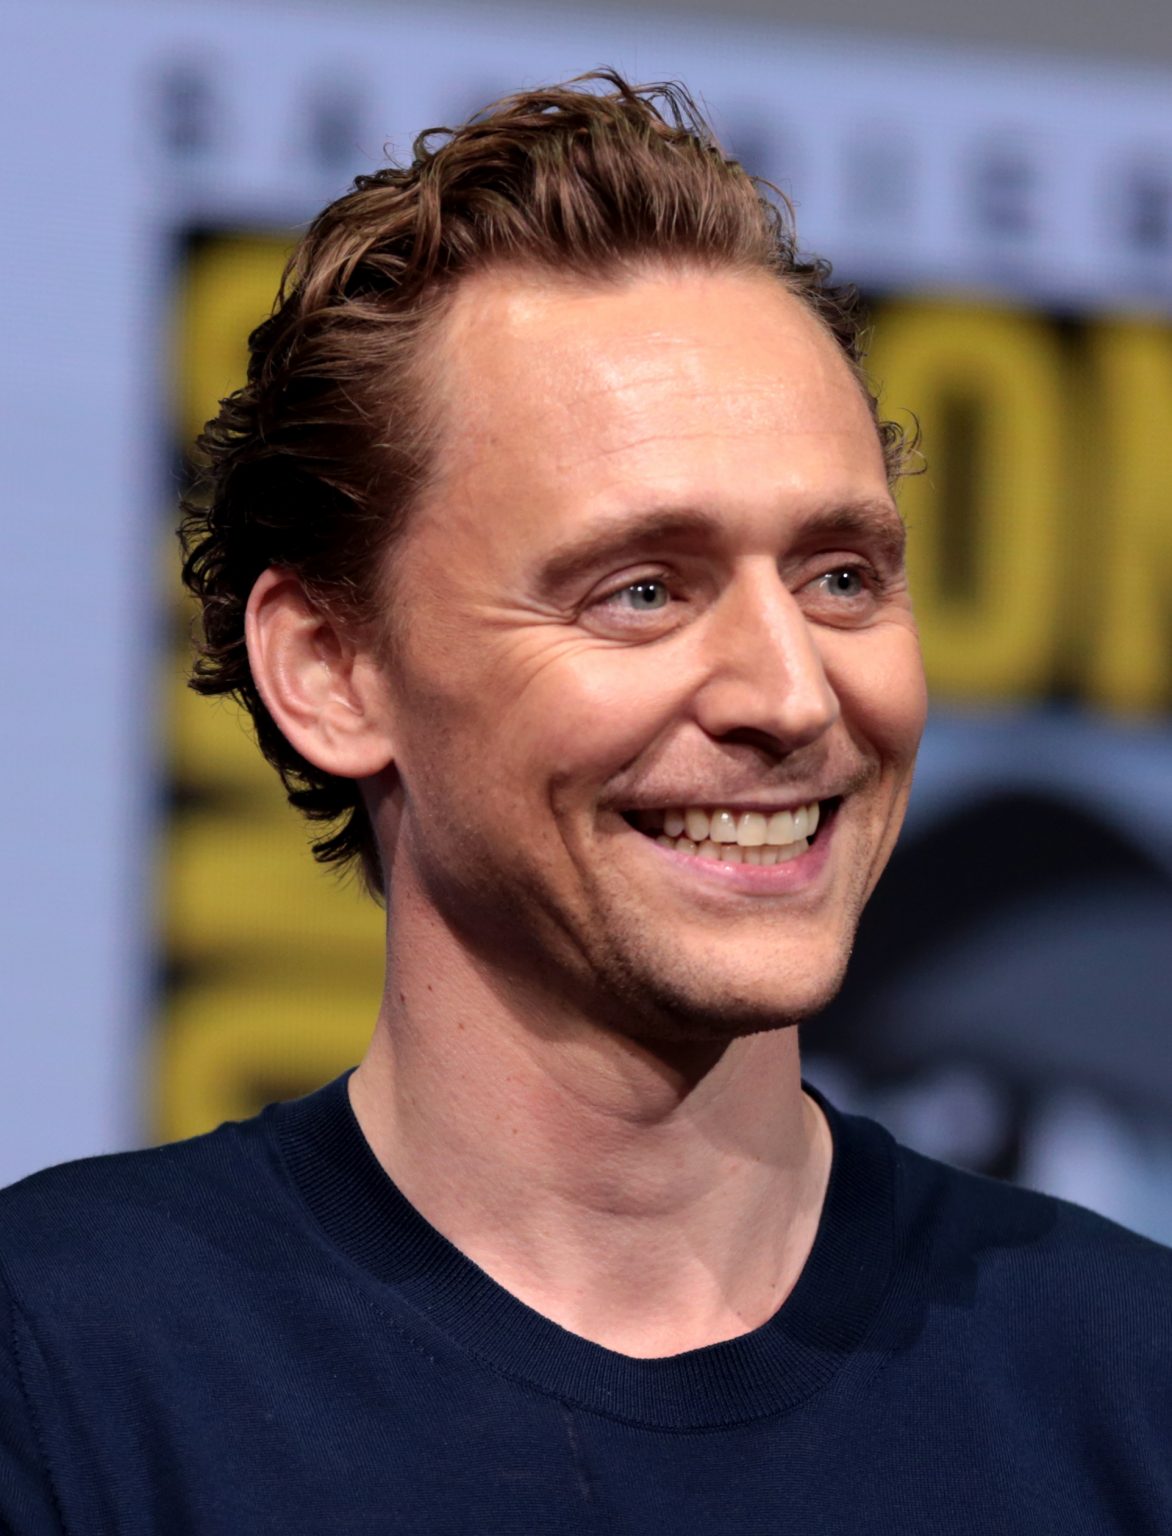 Facts About Tom Hiddleston You Didn't Know - OtakuKart